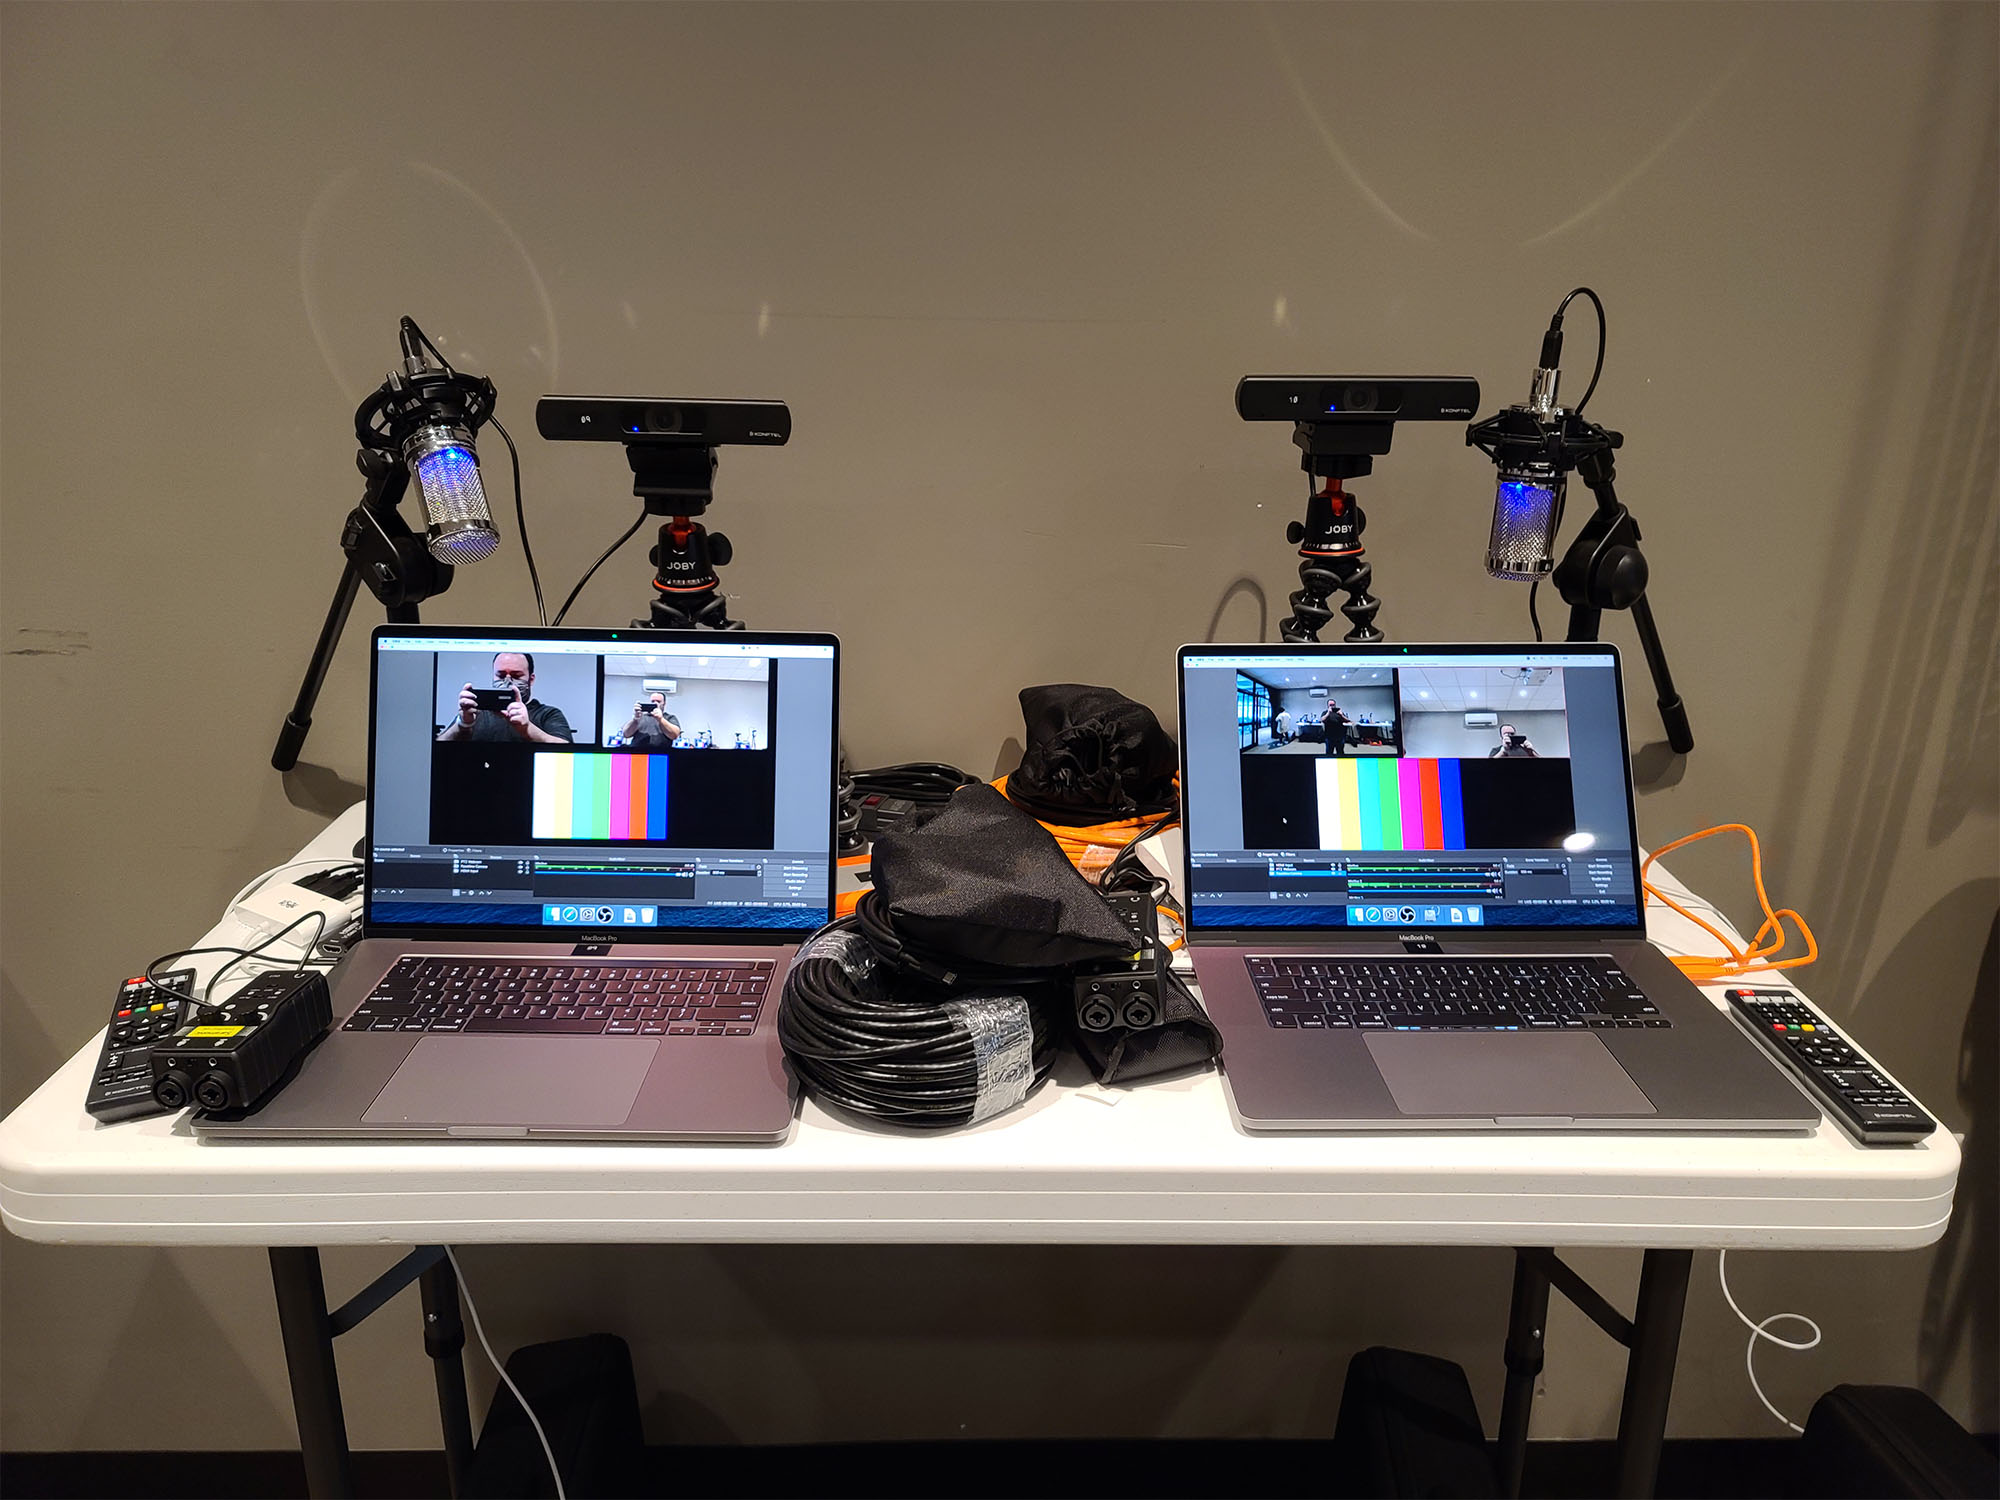 Complex Network's drop kits included webcams, laptops, and professional microphones.